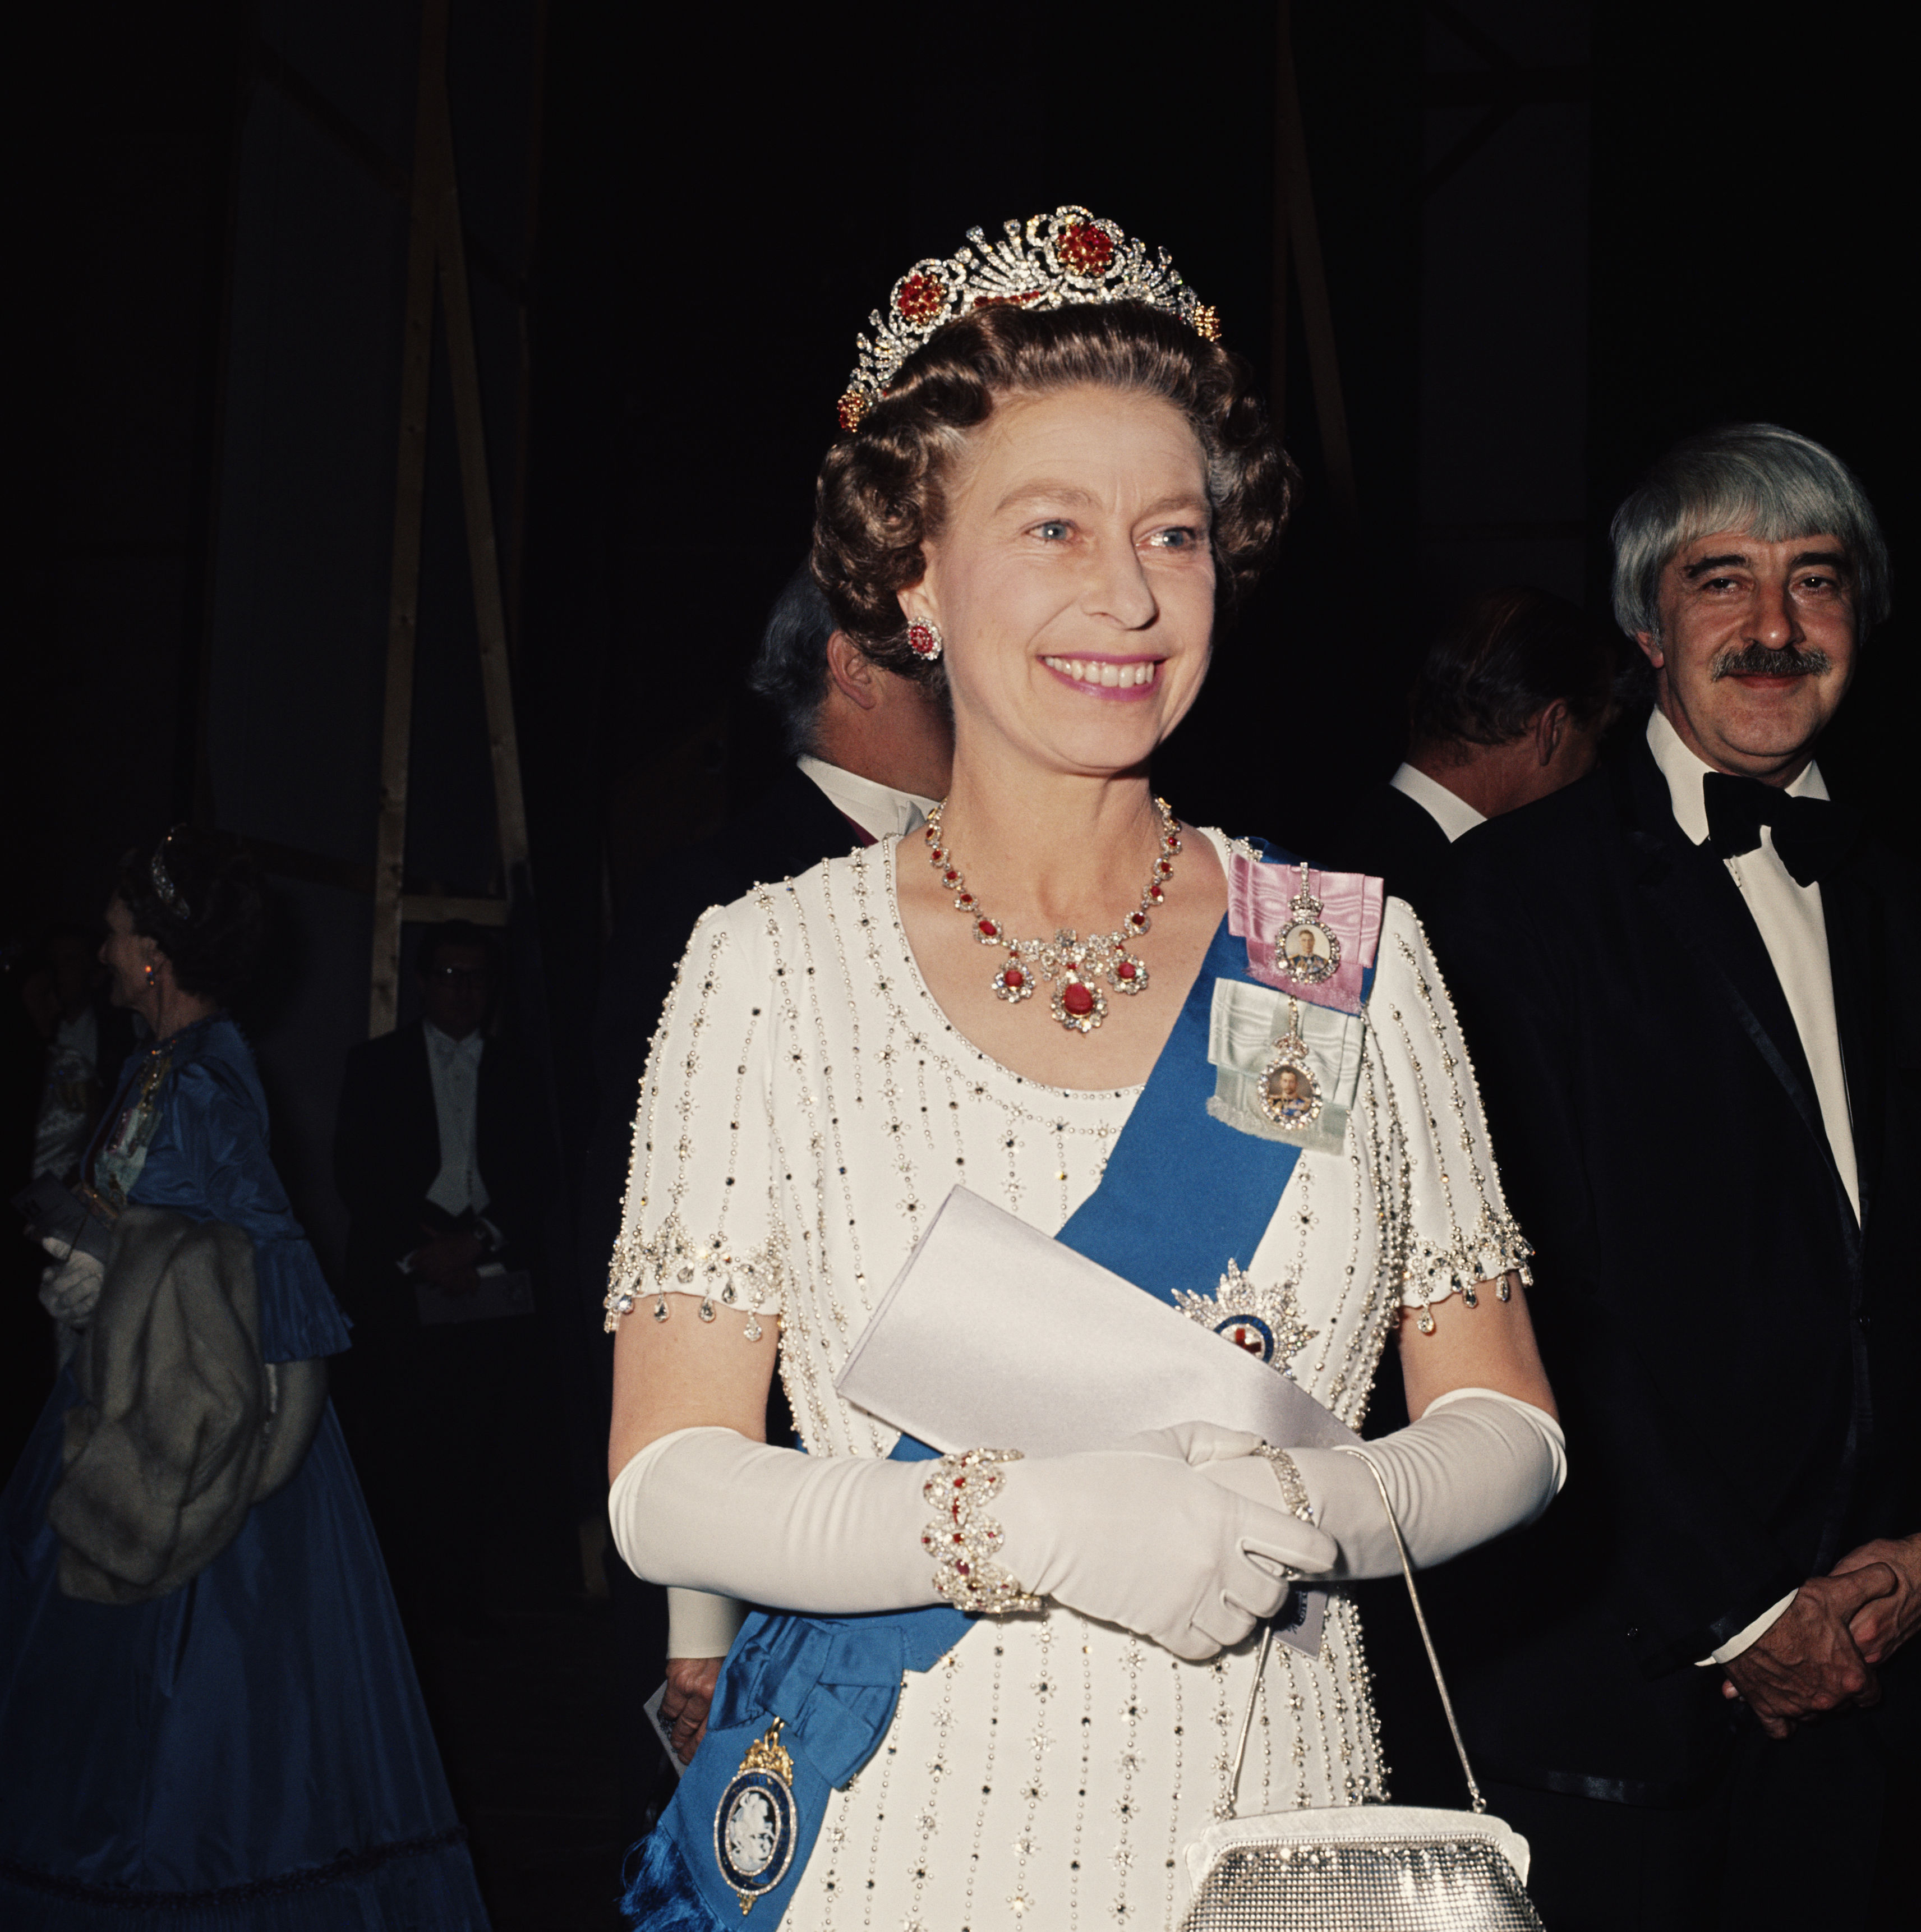 <p>Queen Elizabeth II attended a Royal Gala performance in Covent Garden during her Silver Jubilee celebrations on May 30, 1977 -- marking 25 years since her accession to the throne.</p>